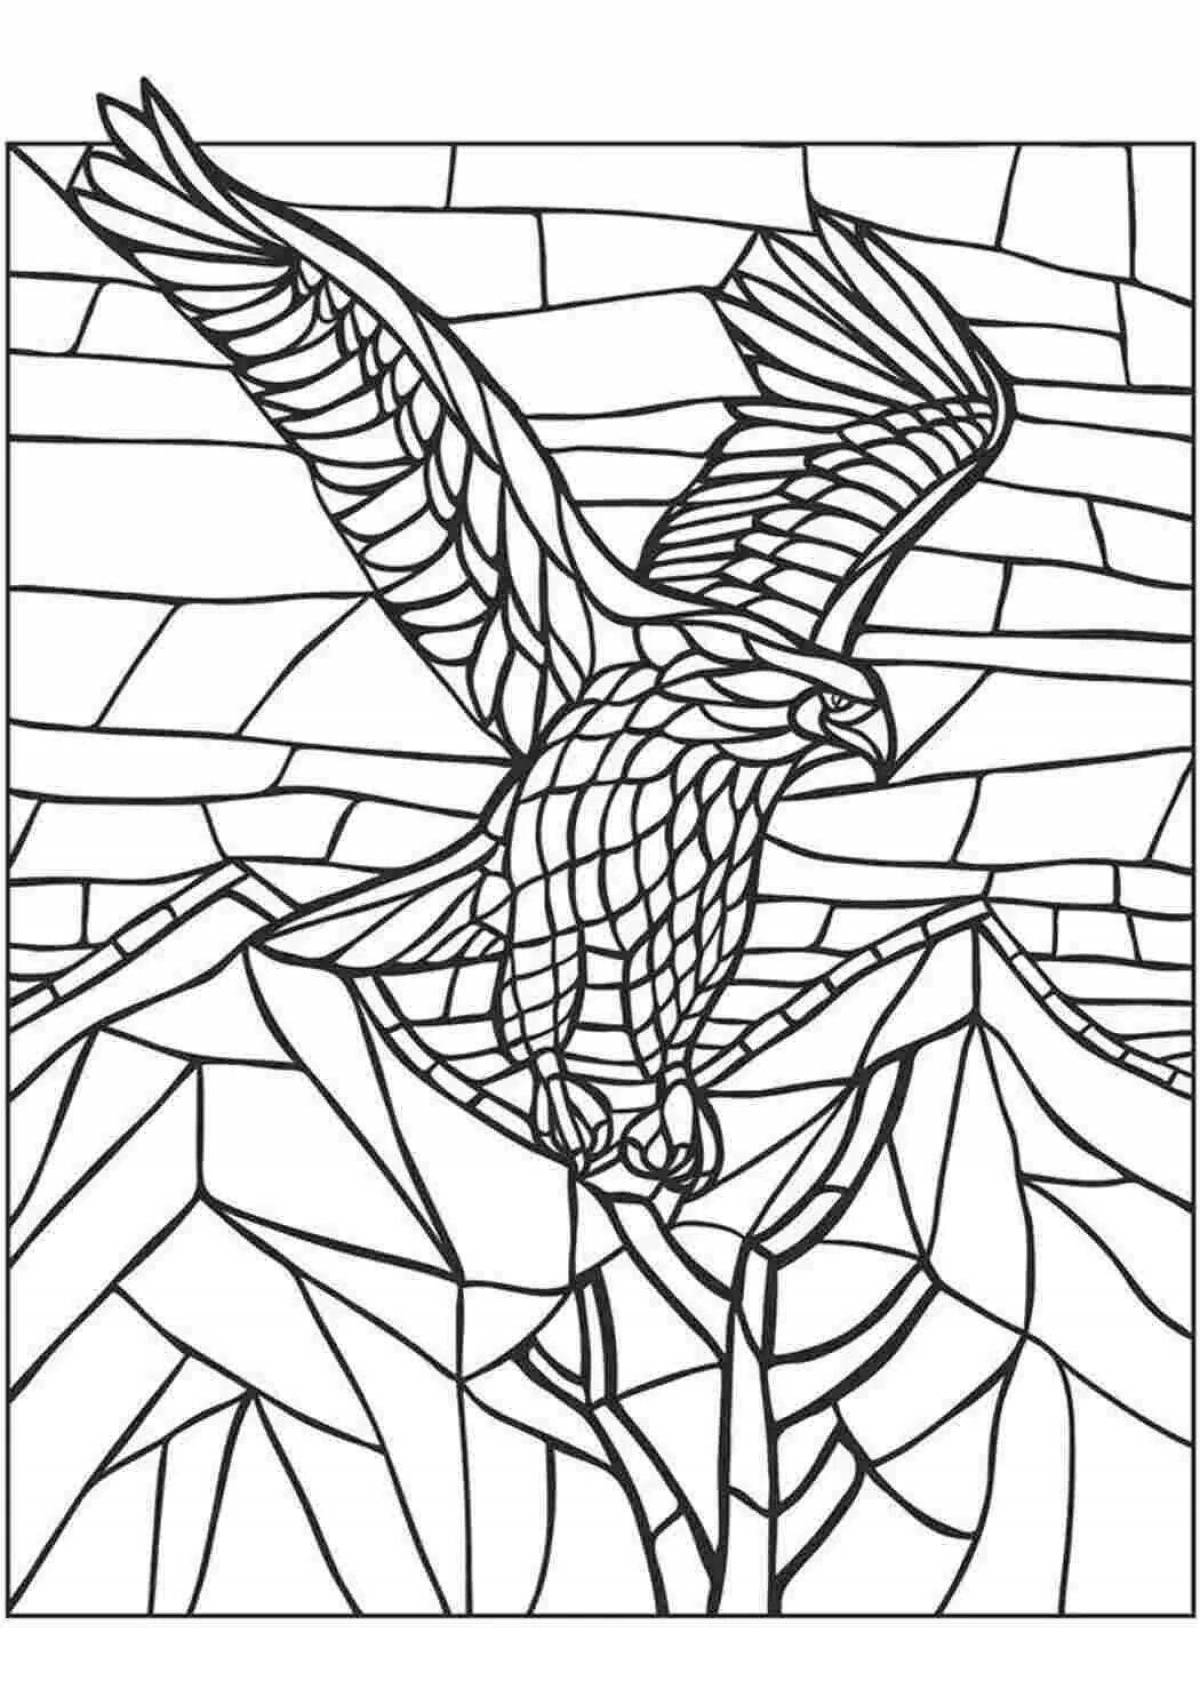 Joyful stained glass coloring book for teens